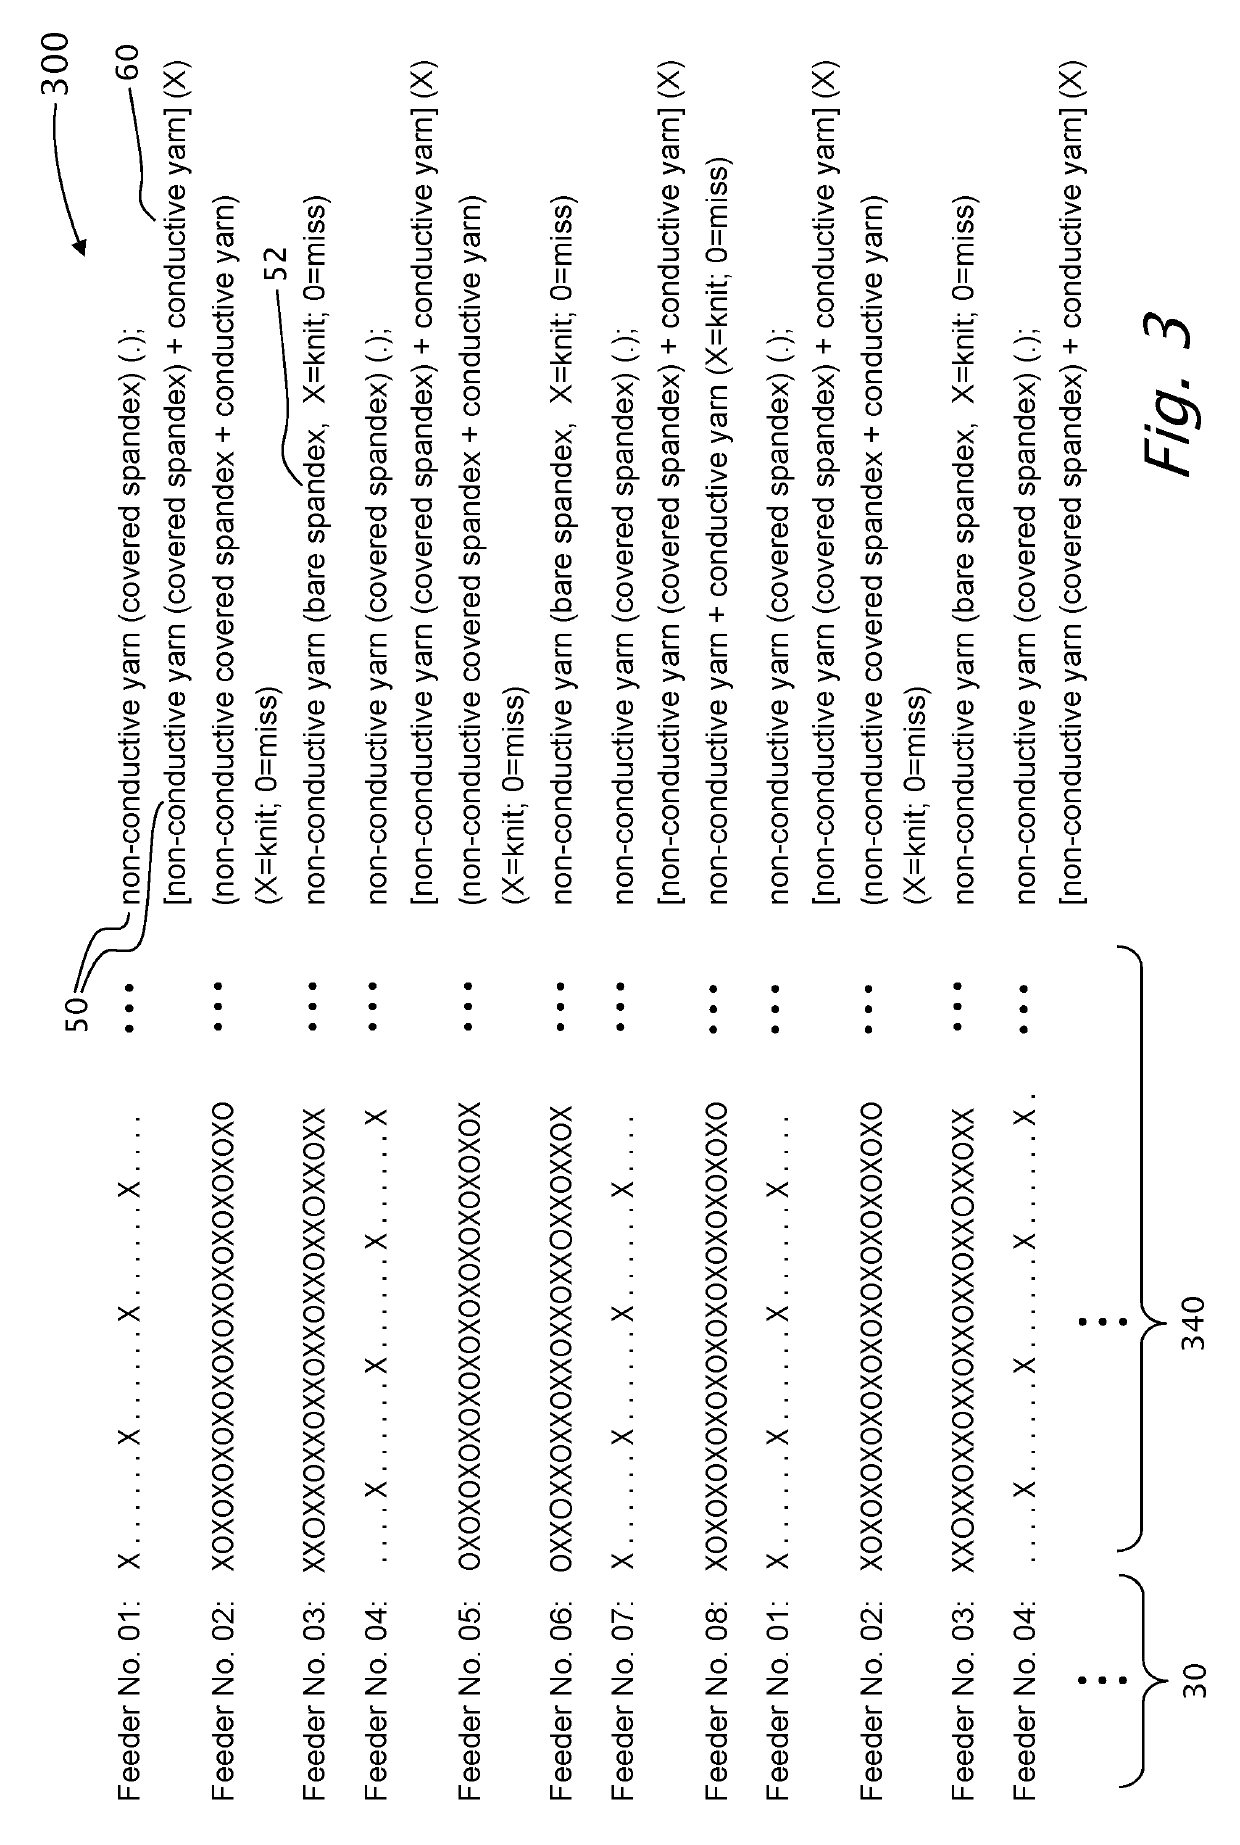 Float loop textile electrodes and methods of knitting thereof